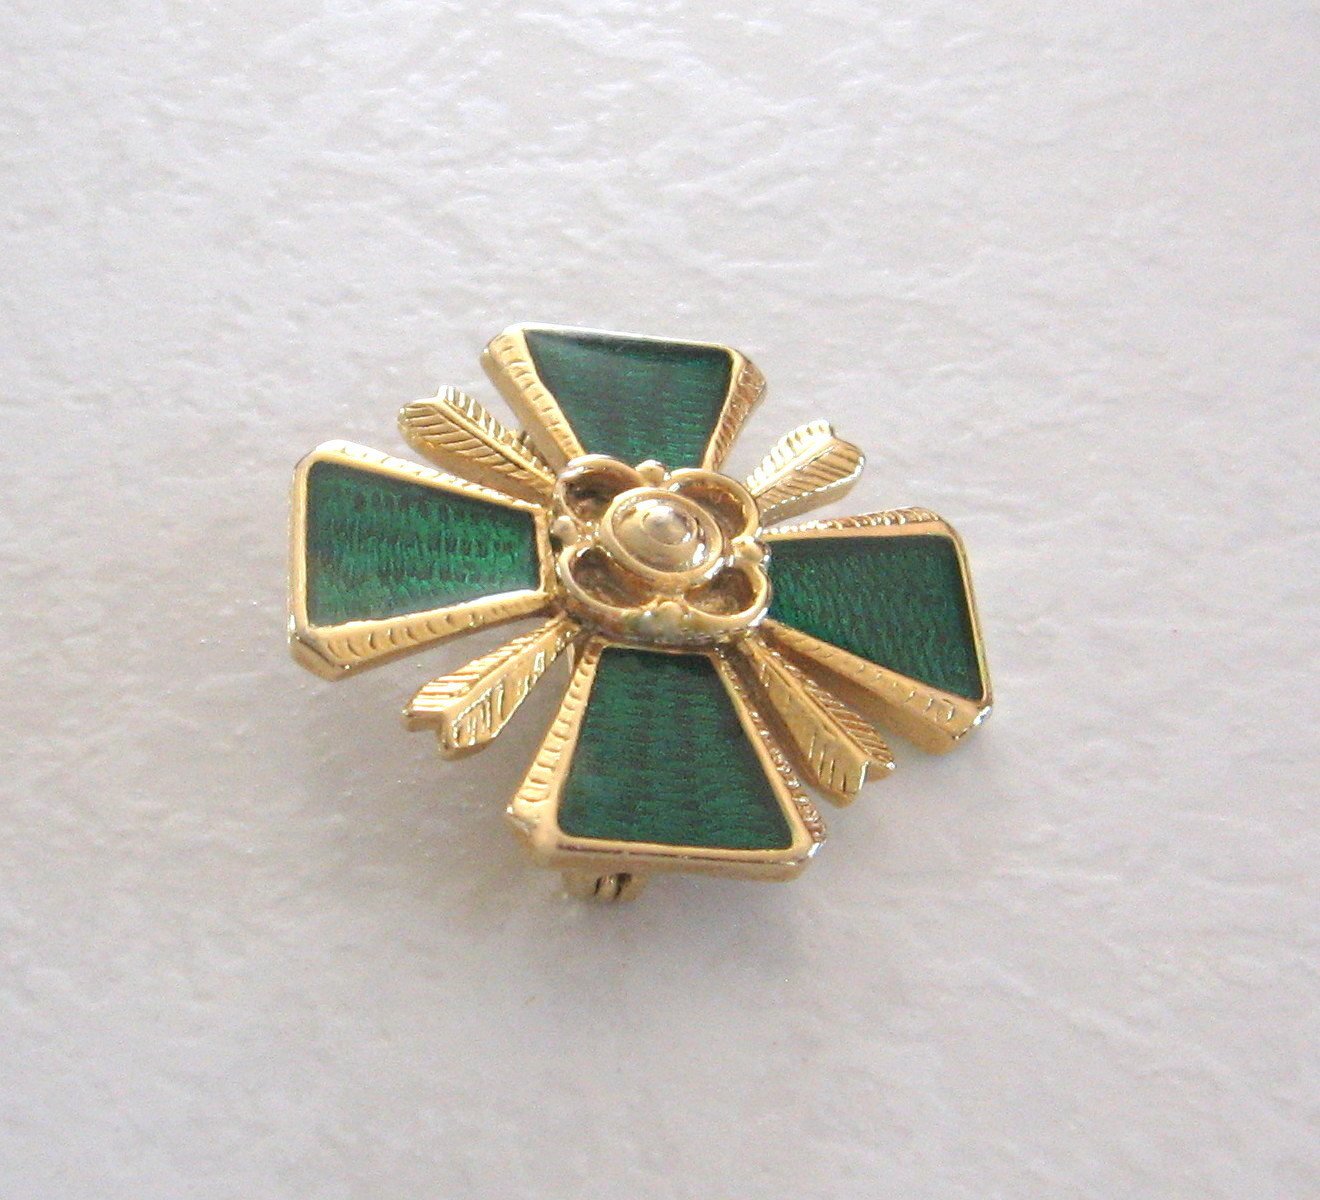 Green & Gold Brooch Pin Vintage Jewelry 1970s